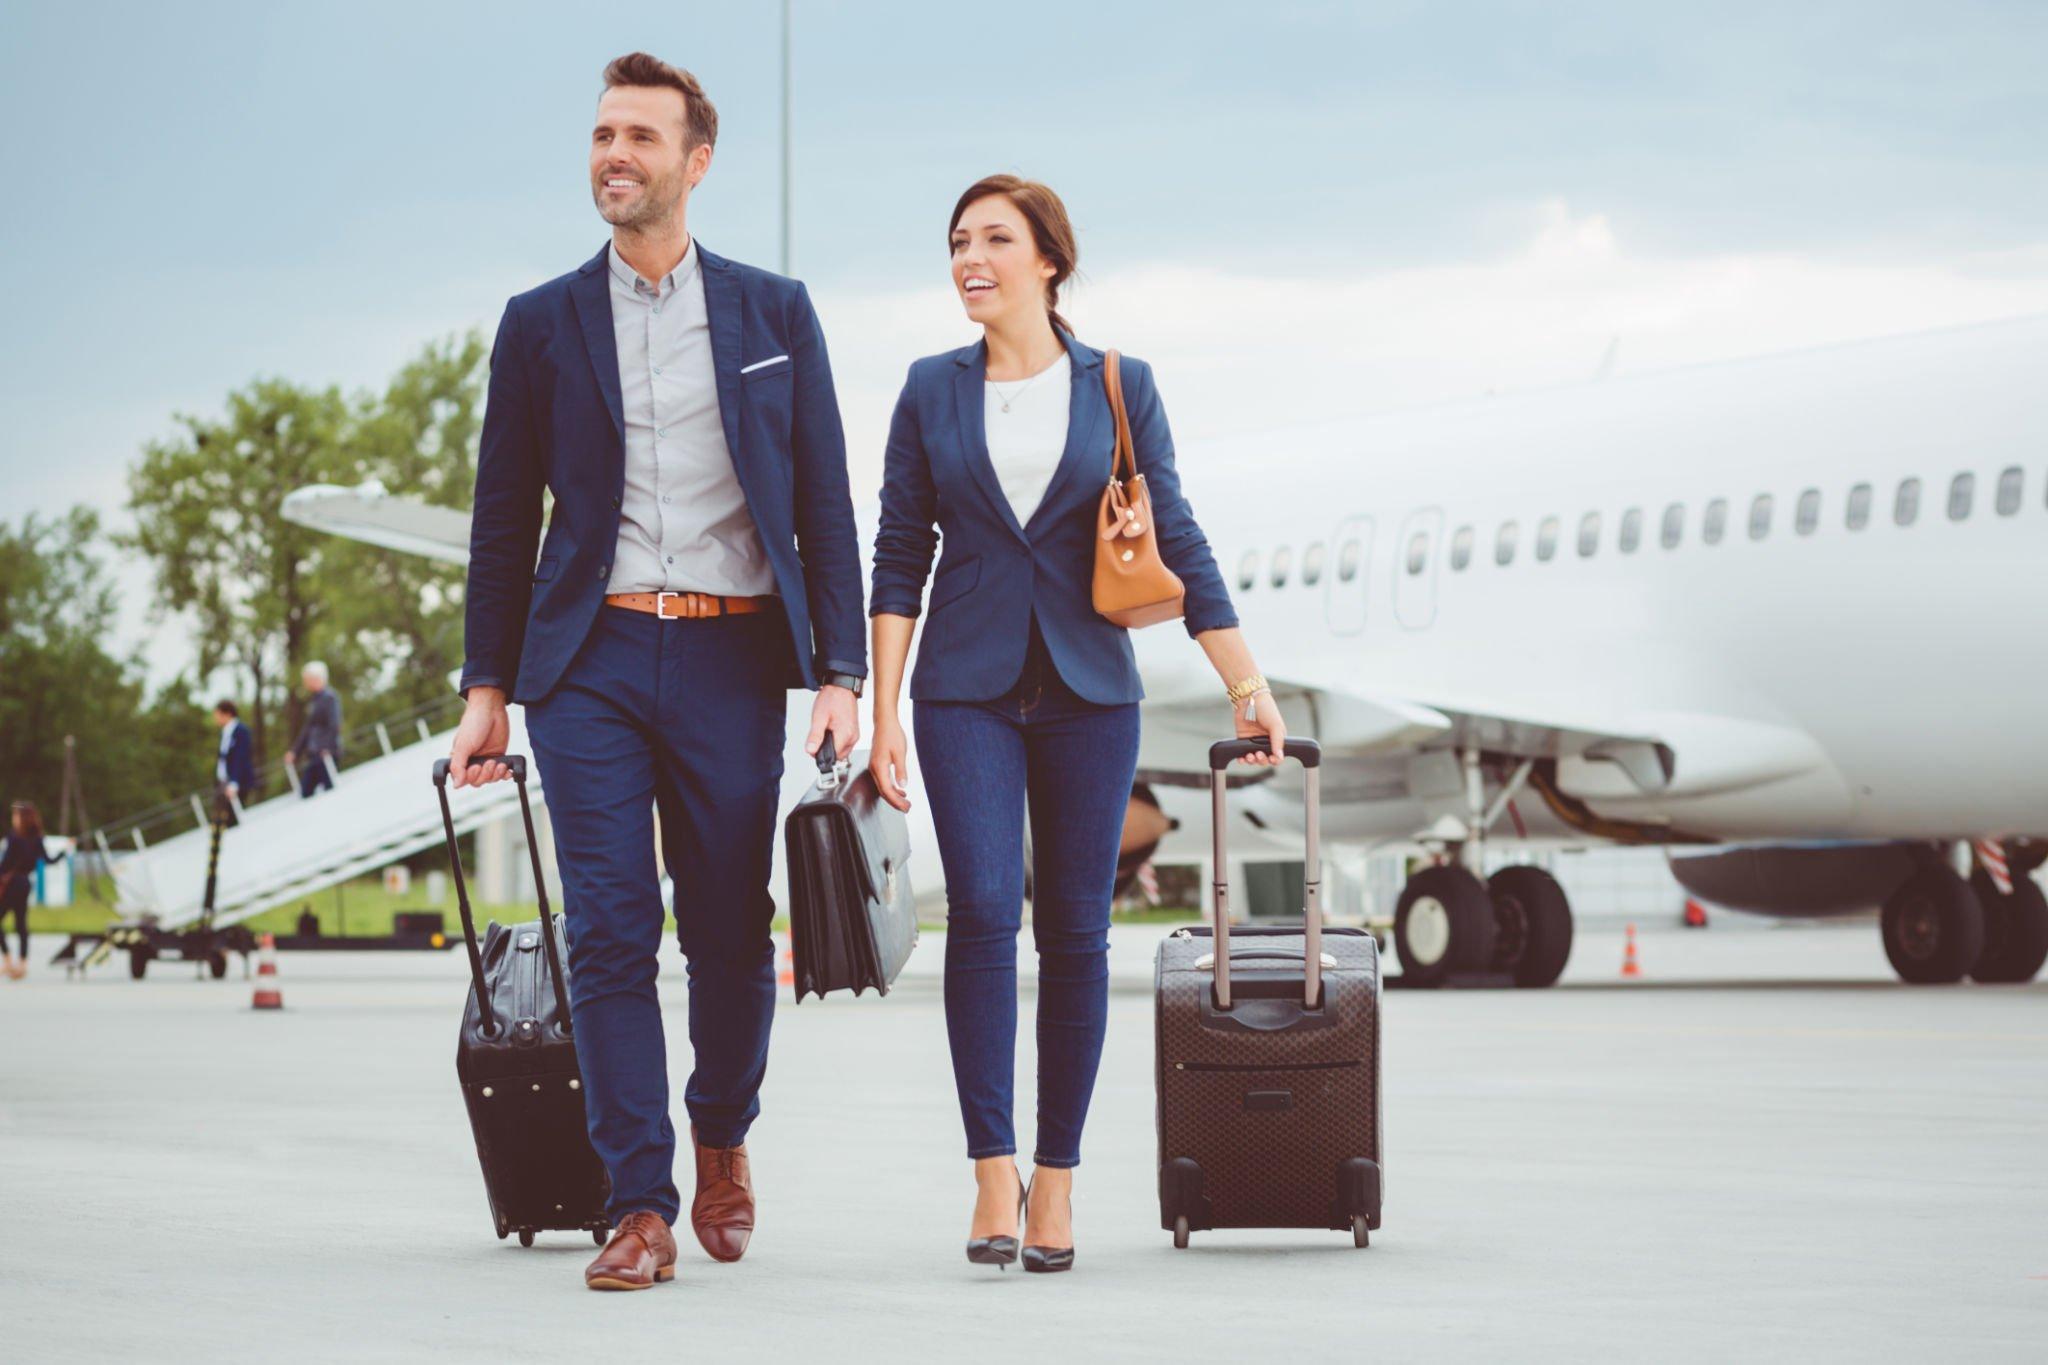 Planning A Business Trip to Grapevine? Here Are Some Tips!